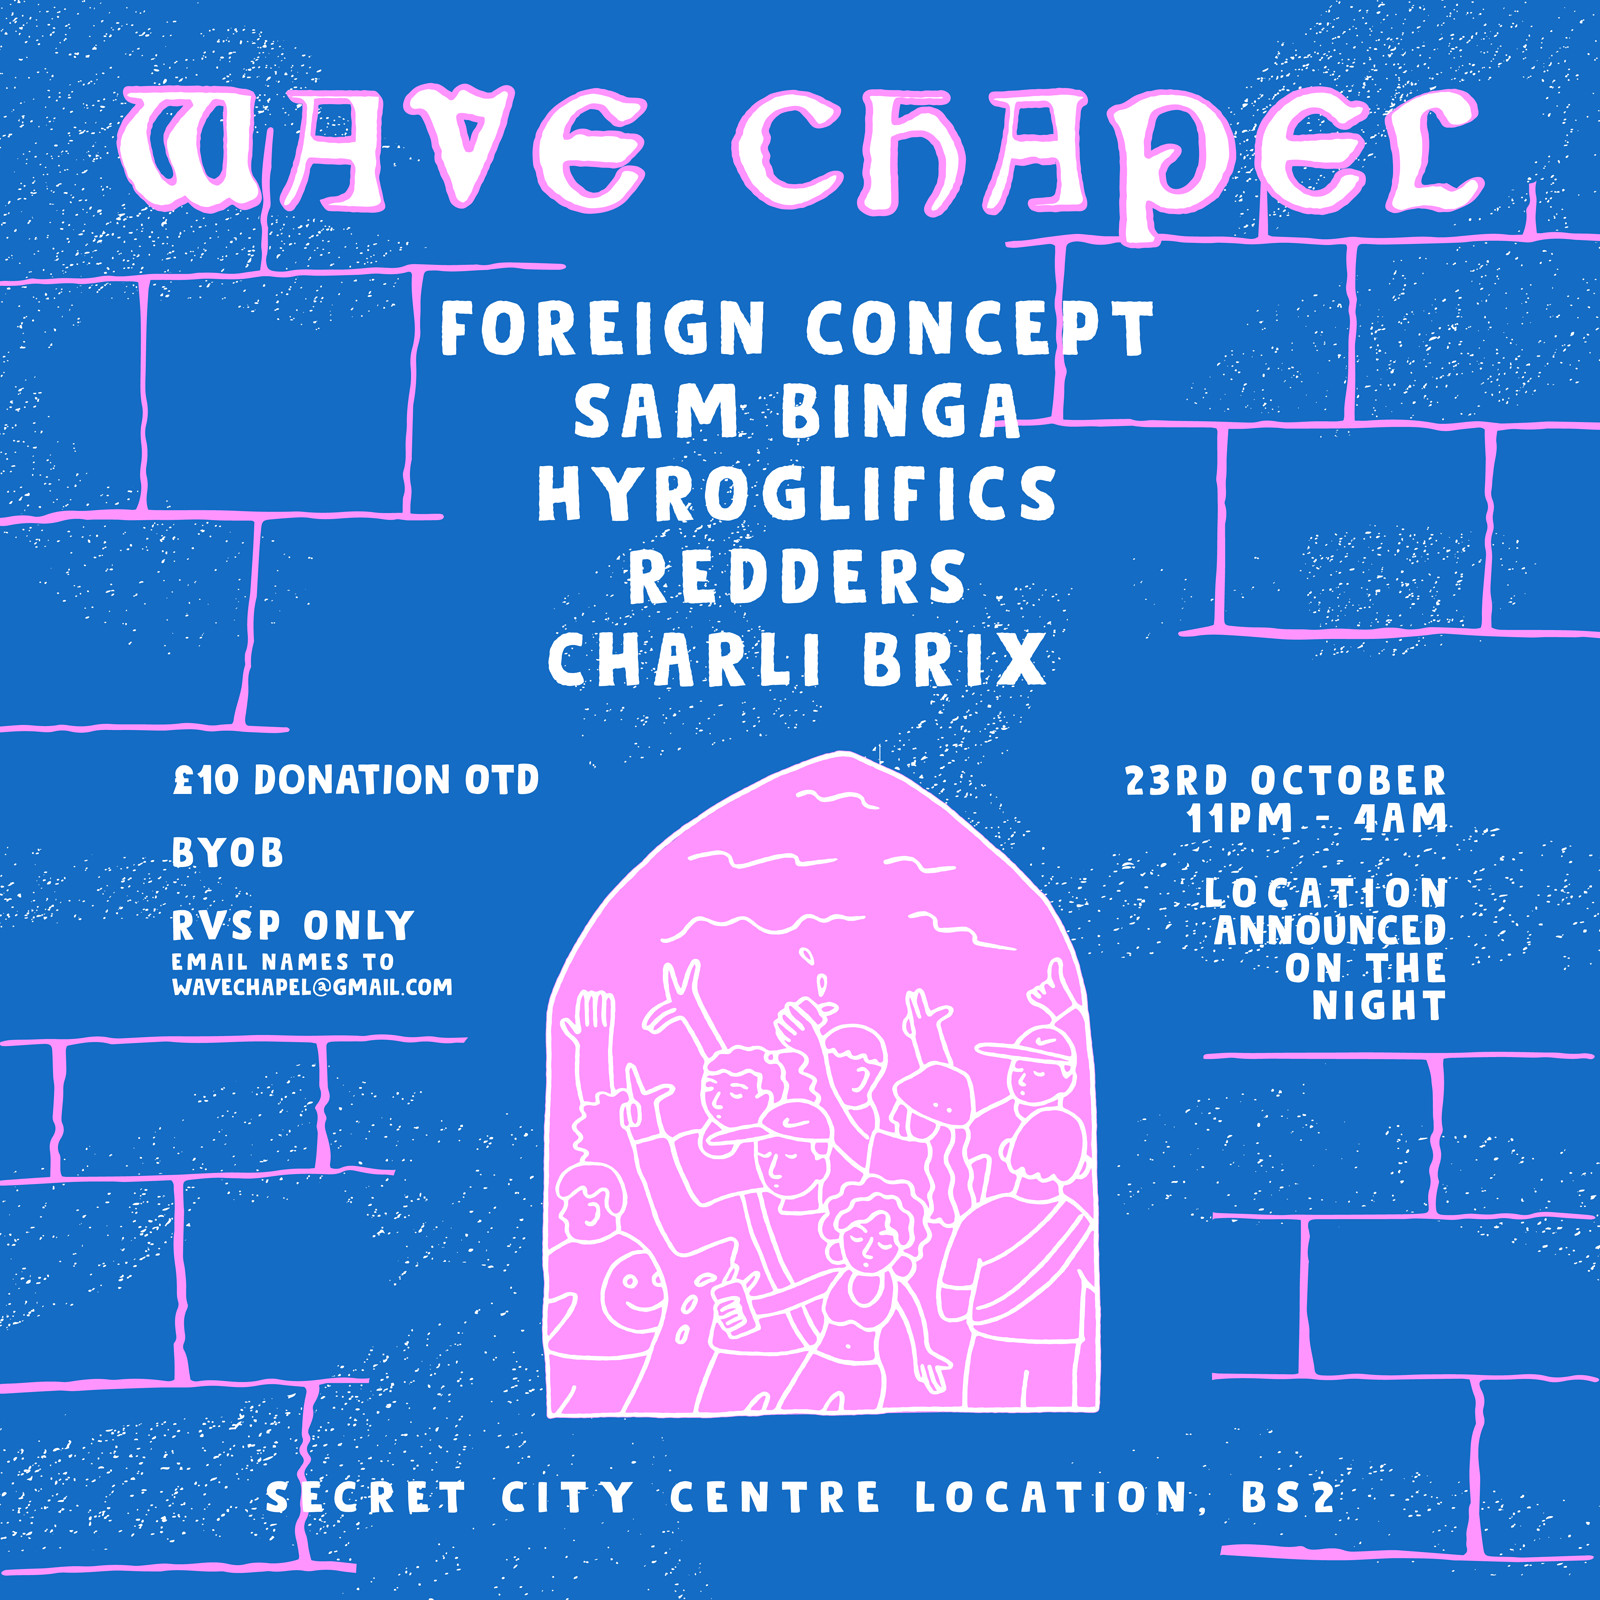 Wave Chapel at Secret Location, BS2. Announced on the night